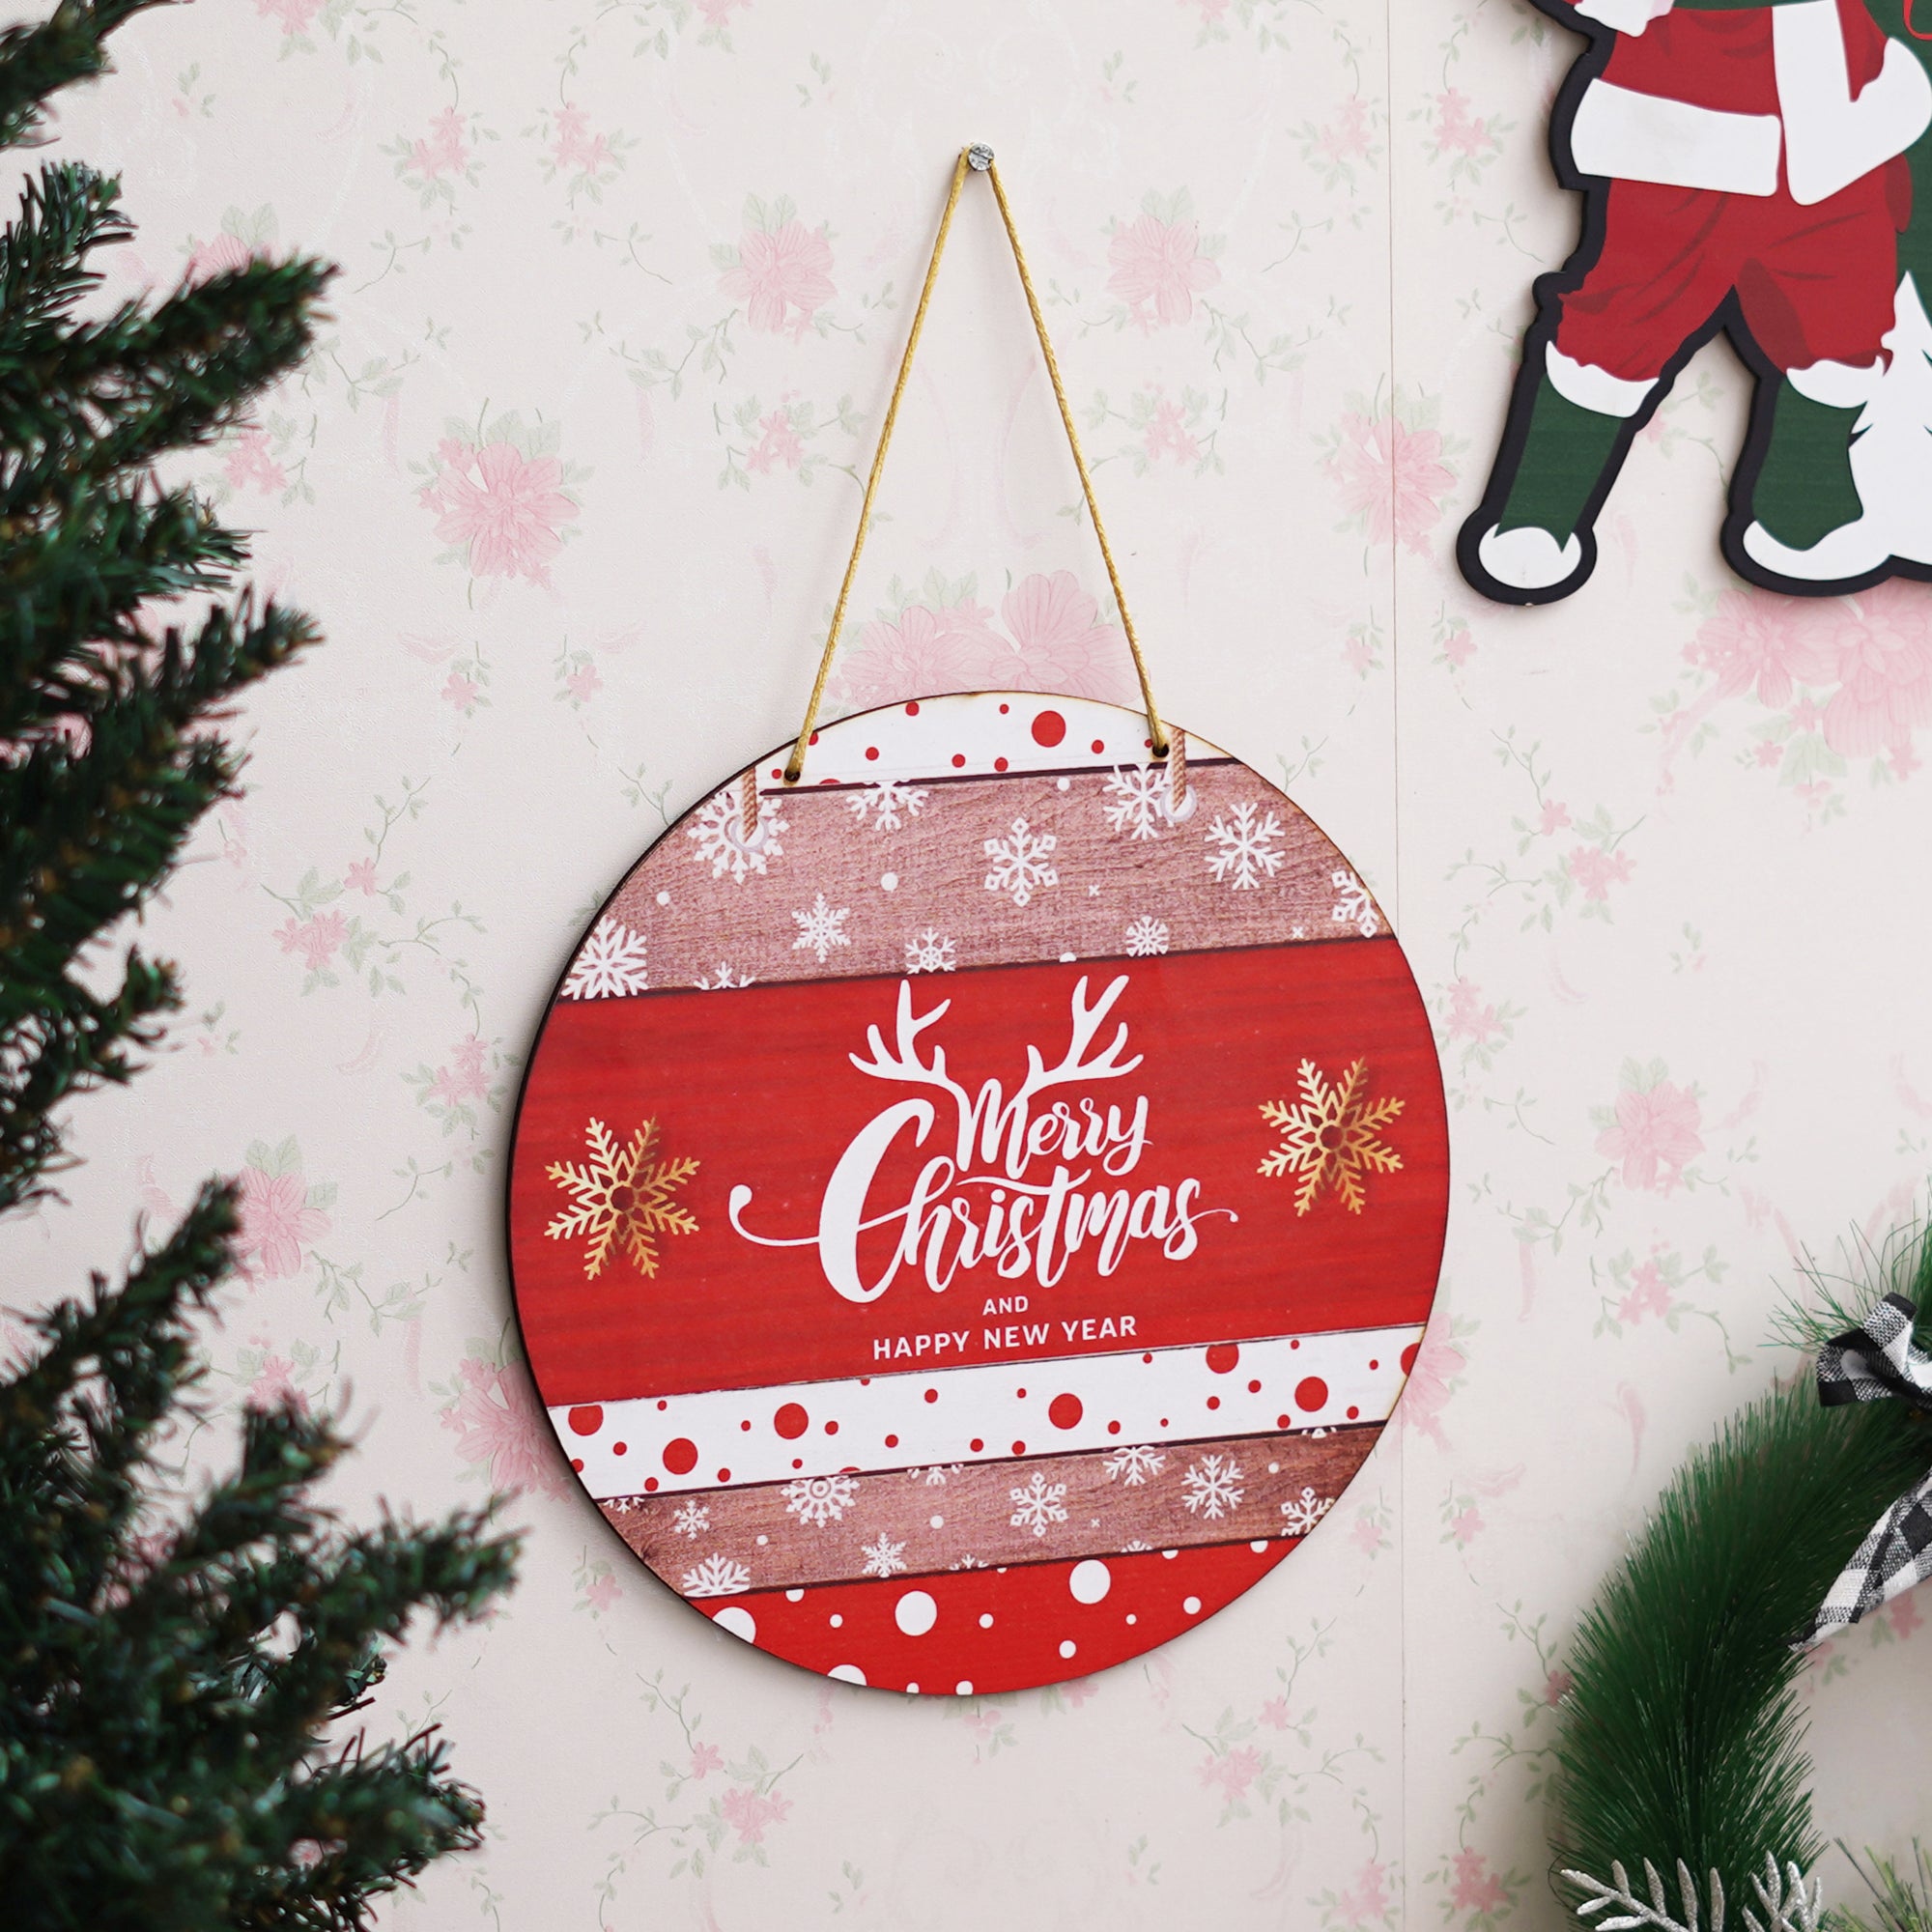 eCraftIndia "Merry Christmas and Happy New Year" Printed Wooden Door Wall Hanging for Home and Christmas Tree Decorations (Red, White, Golden) 4